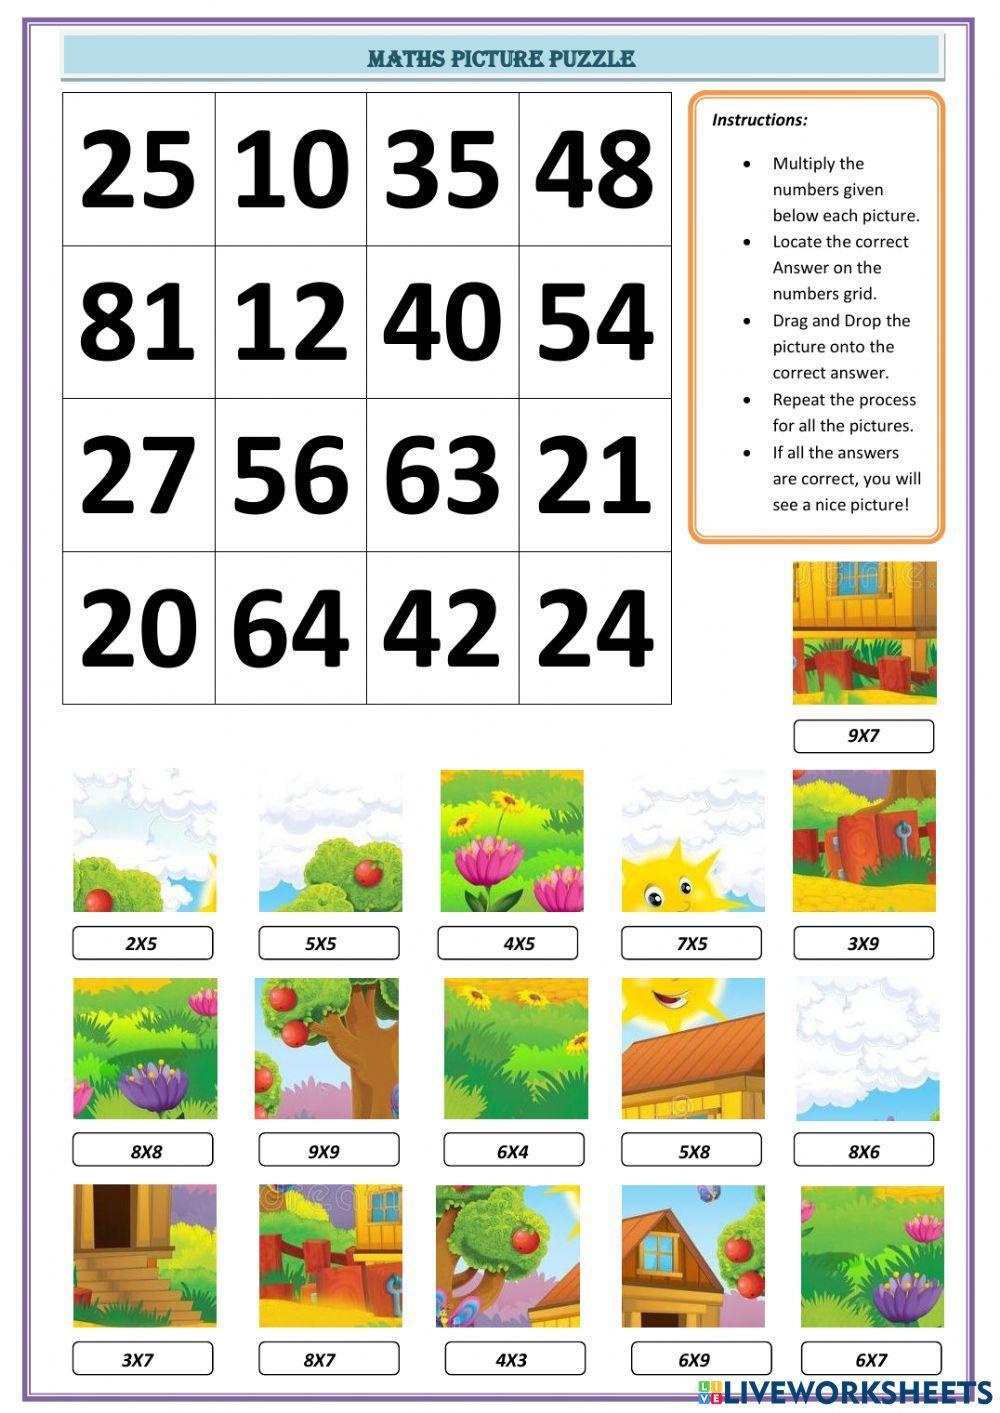 Maths Picture Puzzle-Multiplication